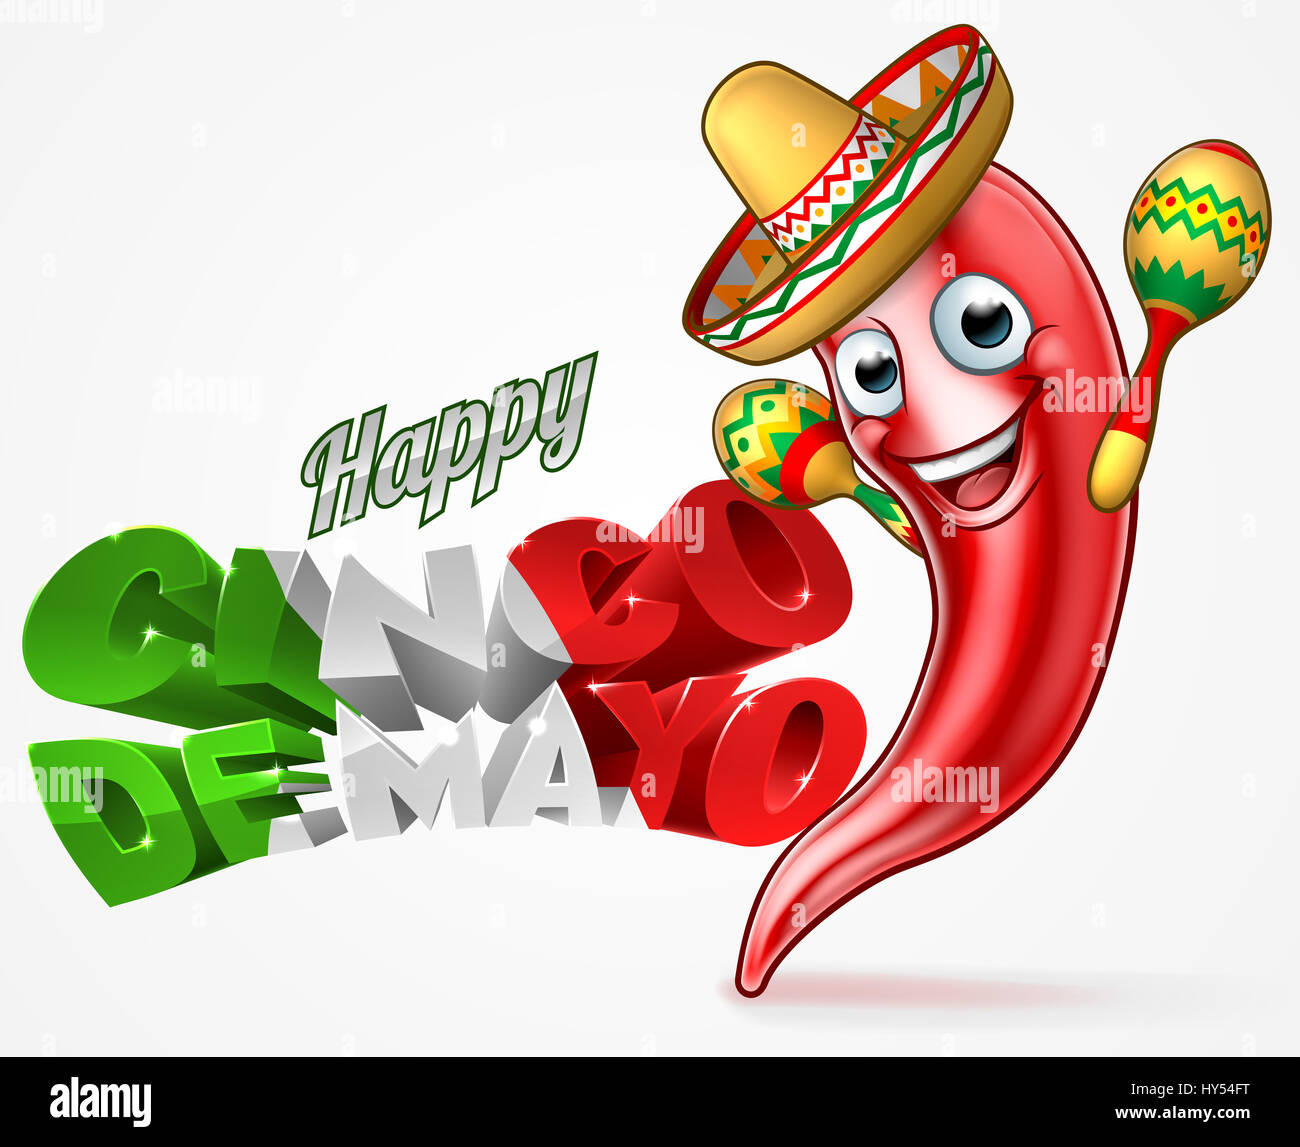 A Happy Cinco De Mayo Mexican design with red chilli pepper cartoon character in sombrero straw hat holding maracas shakers Stock Photo